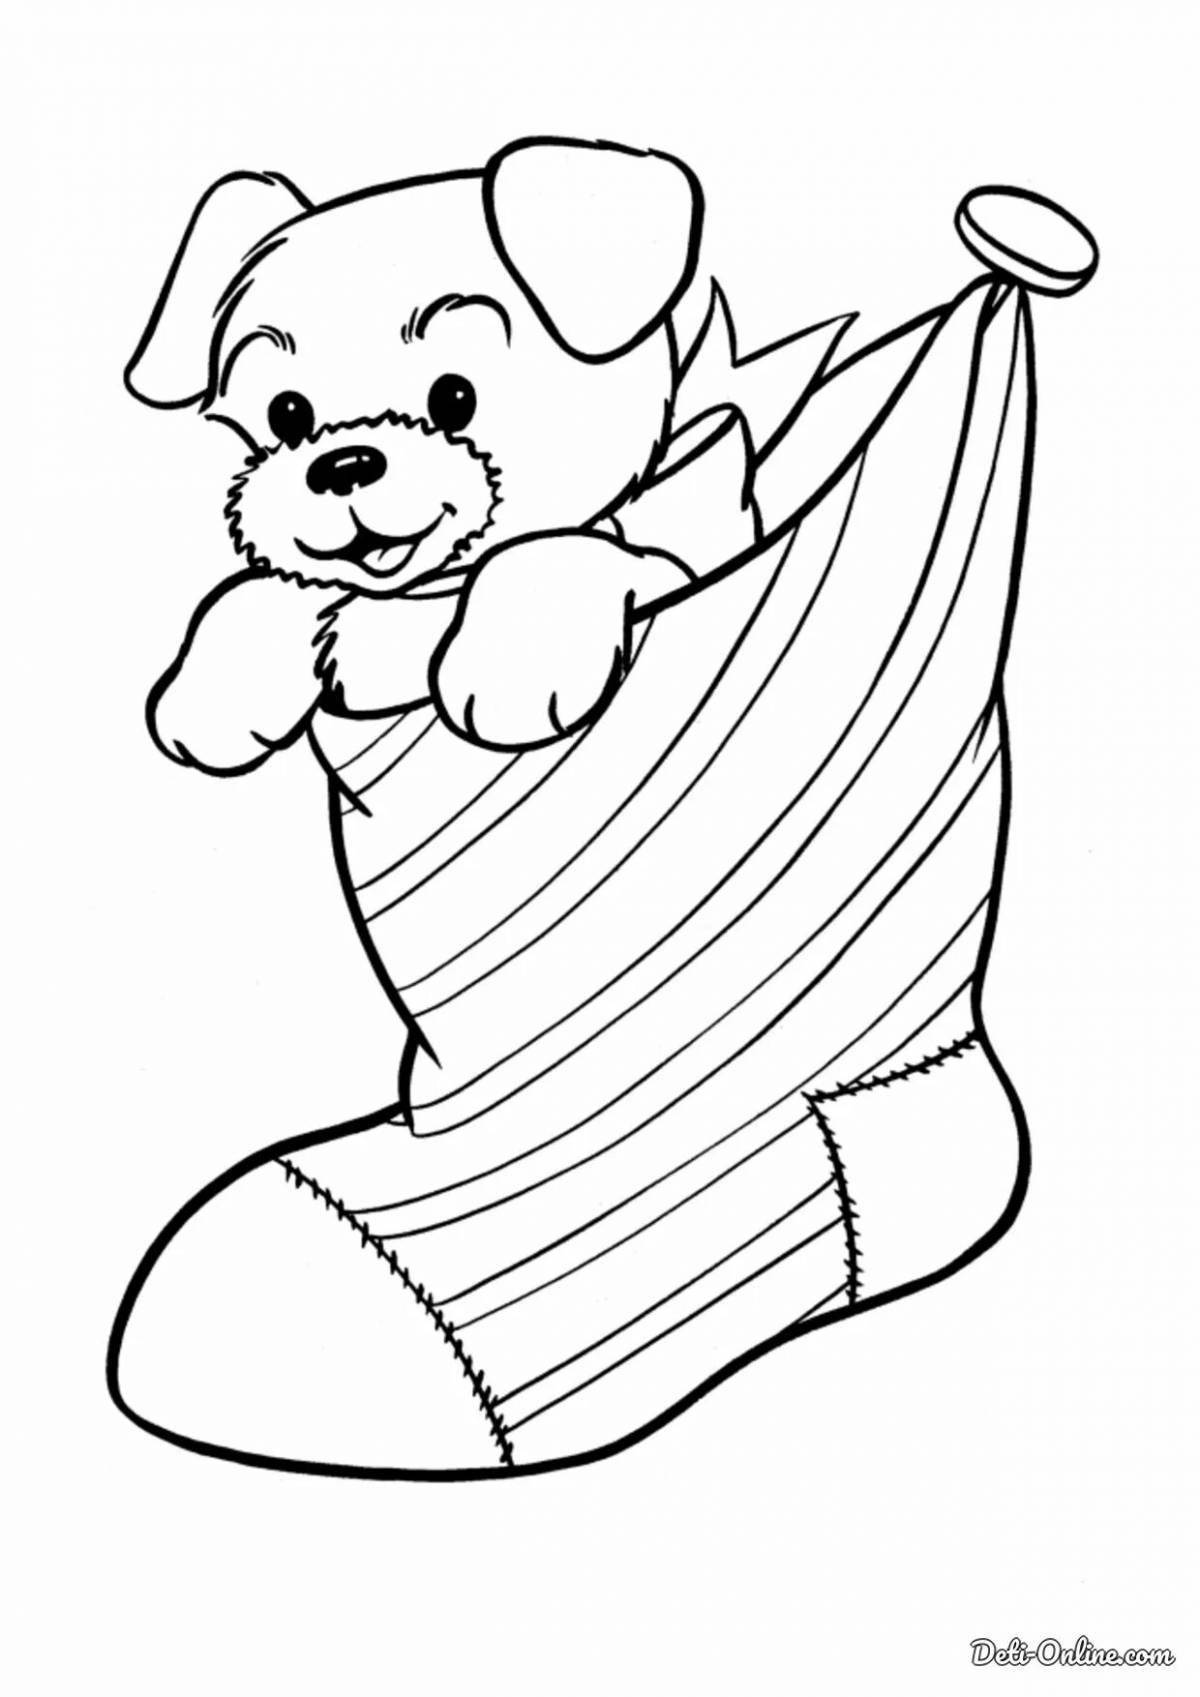 Glitter dog Christmas coloring book